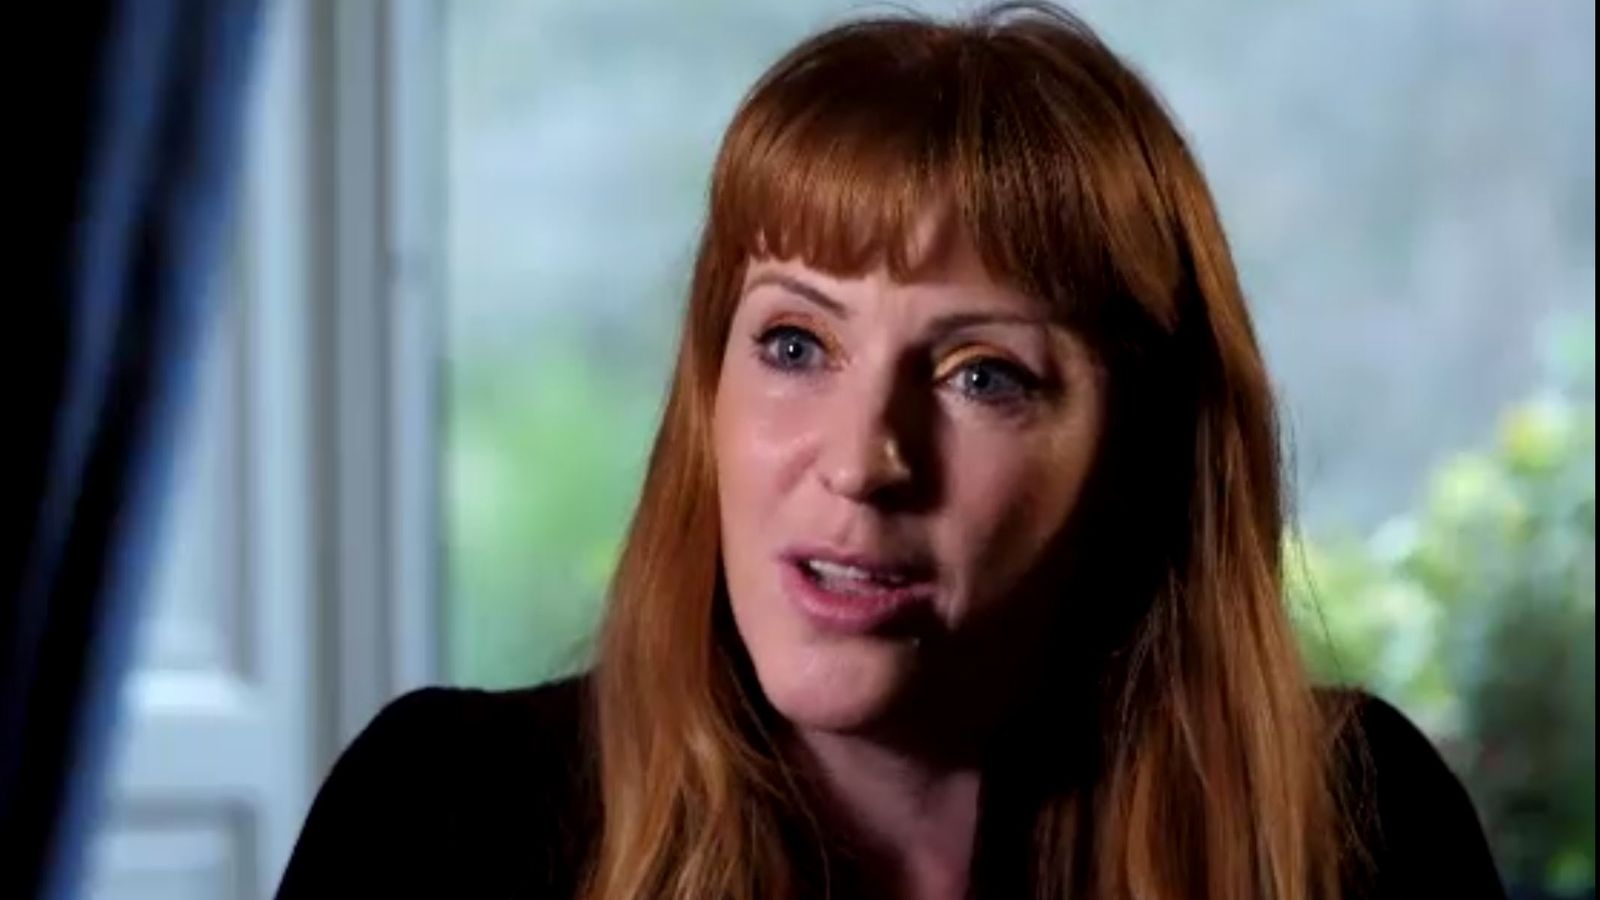 Labour's Angela Rayner 'no longer goes out' because of threats and was 'scared' by protest confrontation